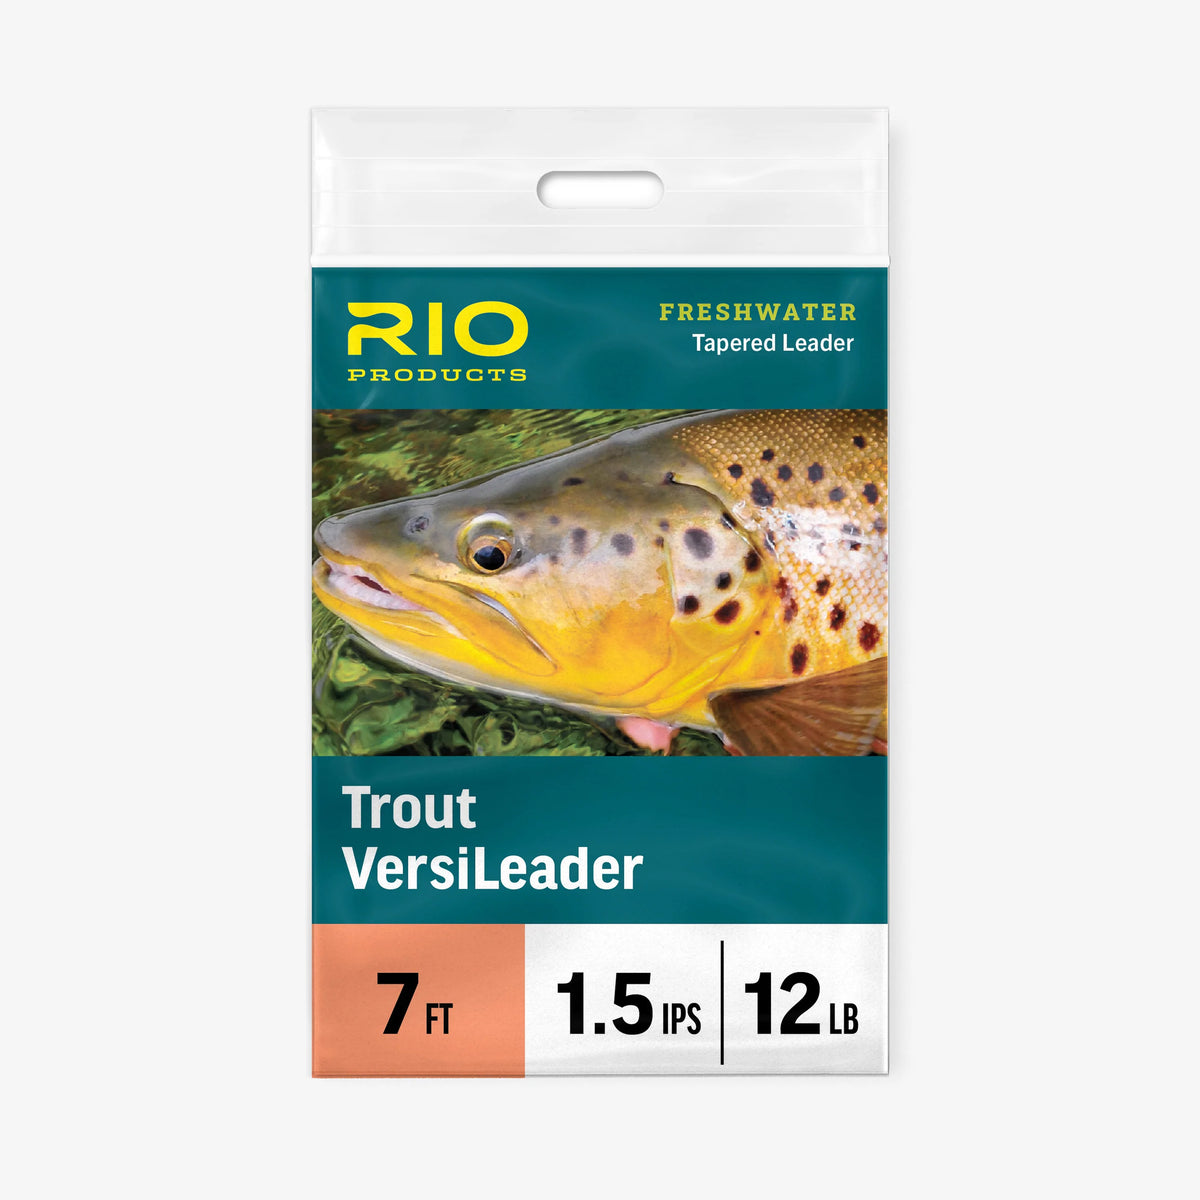 RIO Elite Technical Trout Fly Line • Anglers Lodge